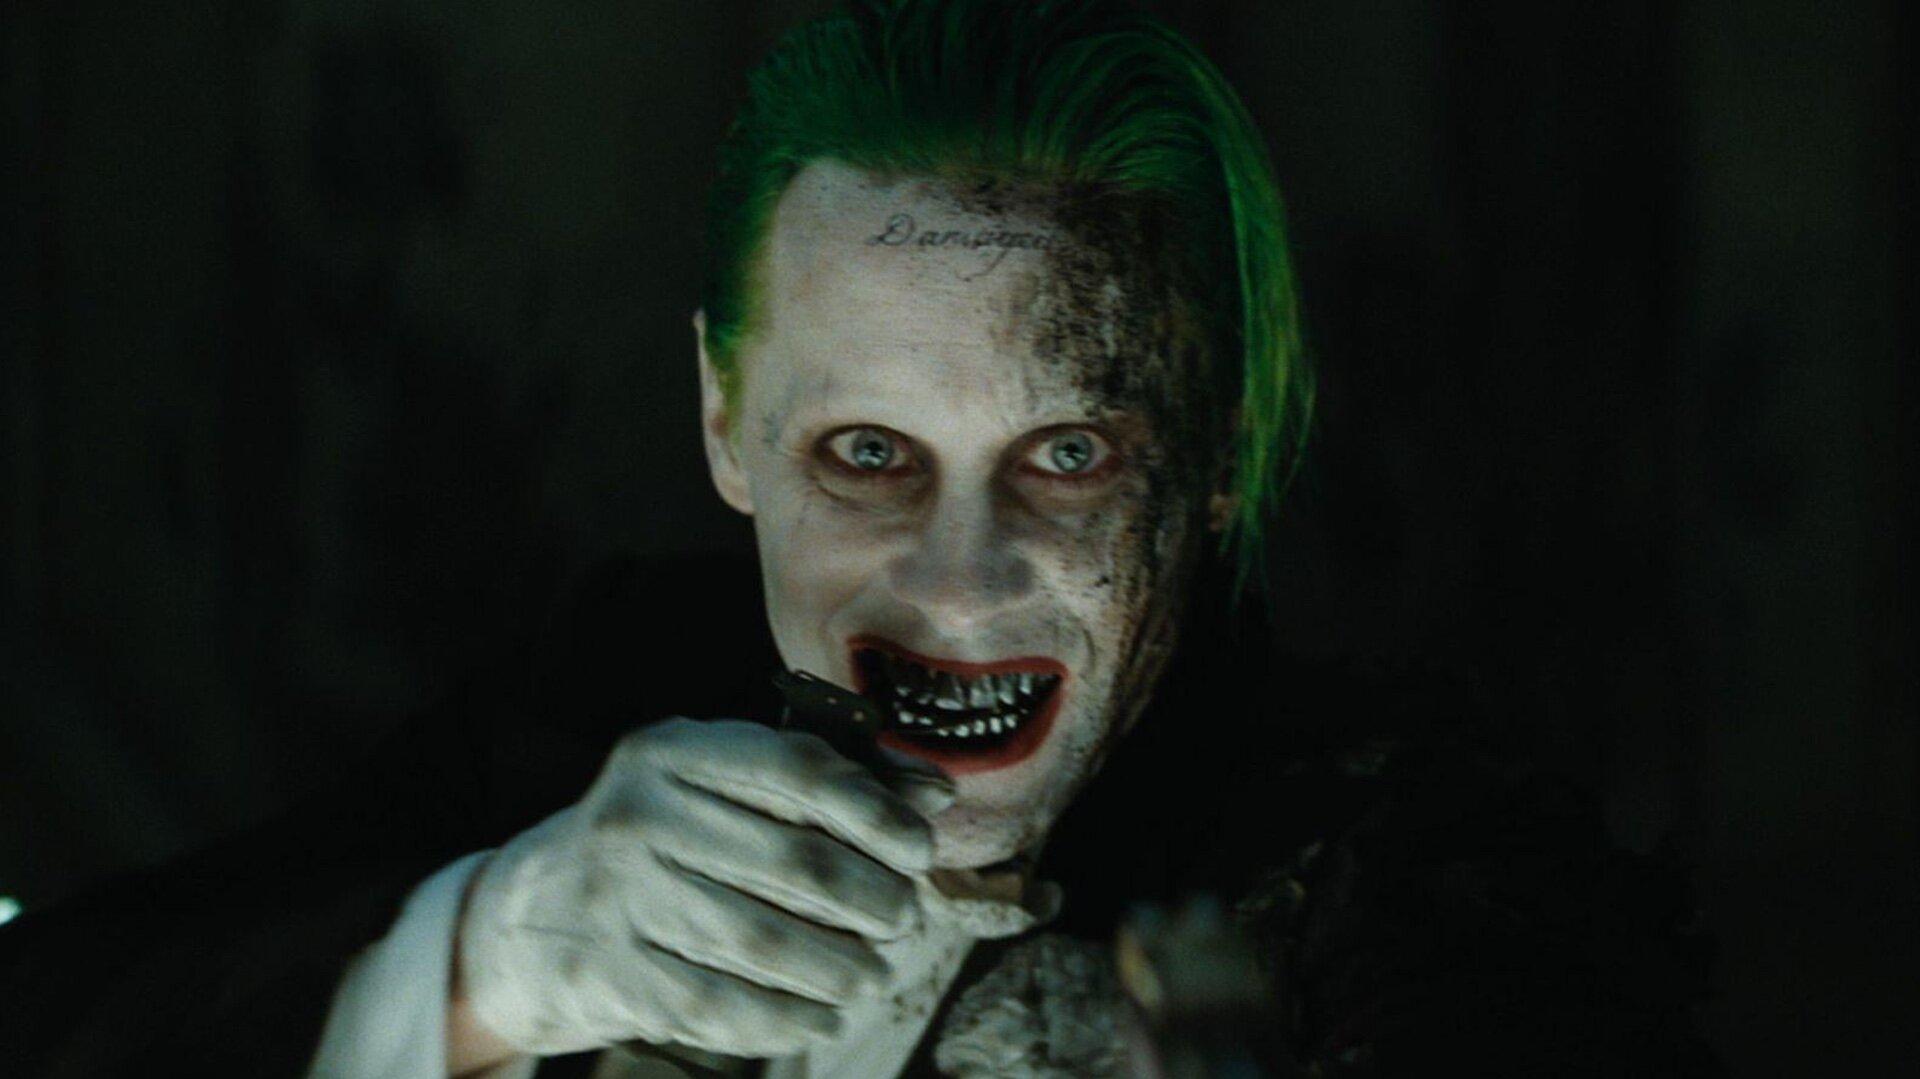 David Ayer Shares Unseen Clip From Suicide Squad Featuring Jared